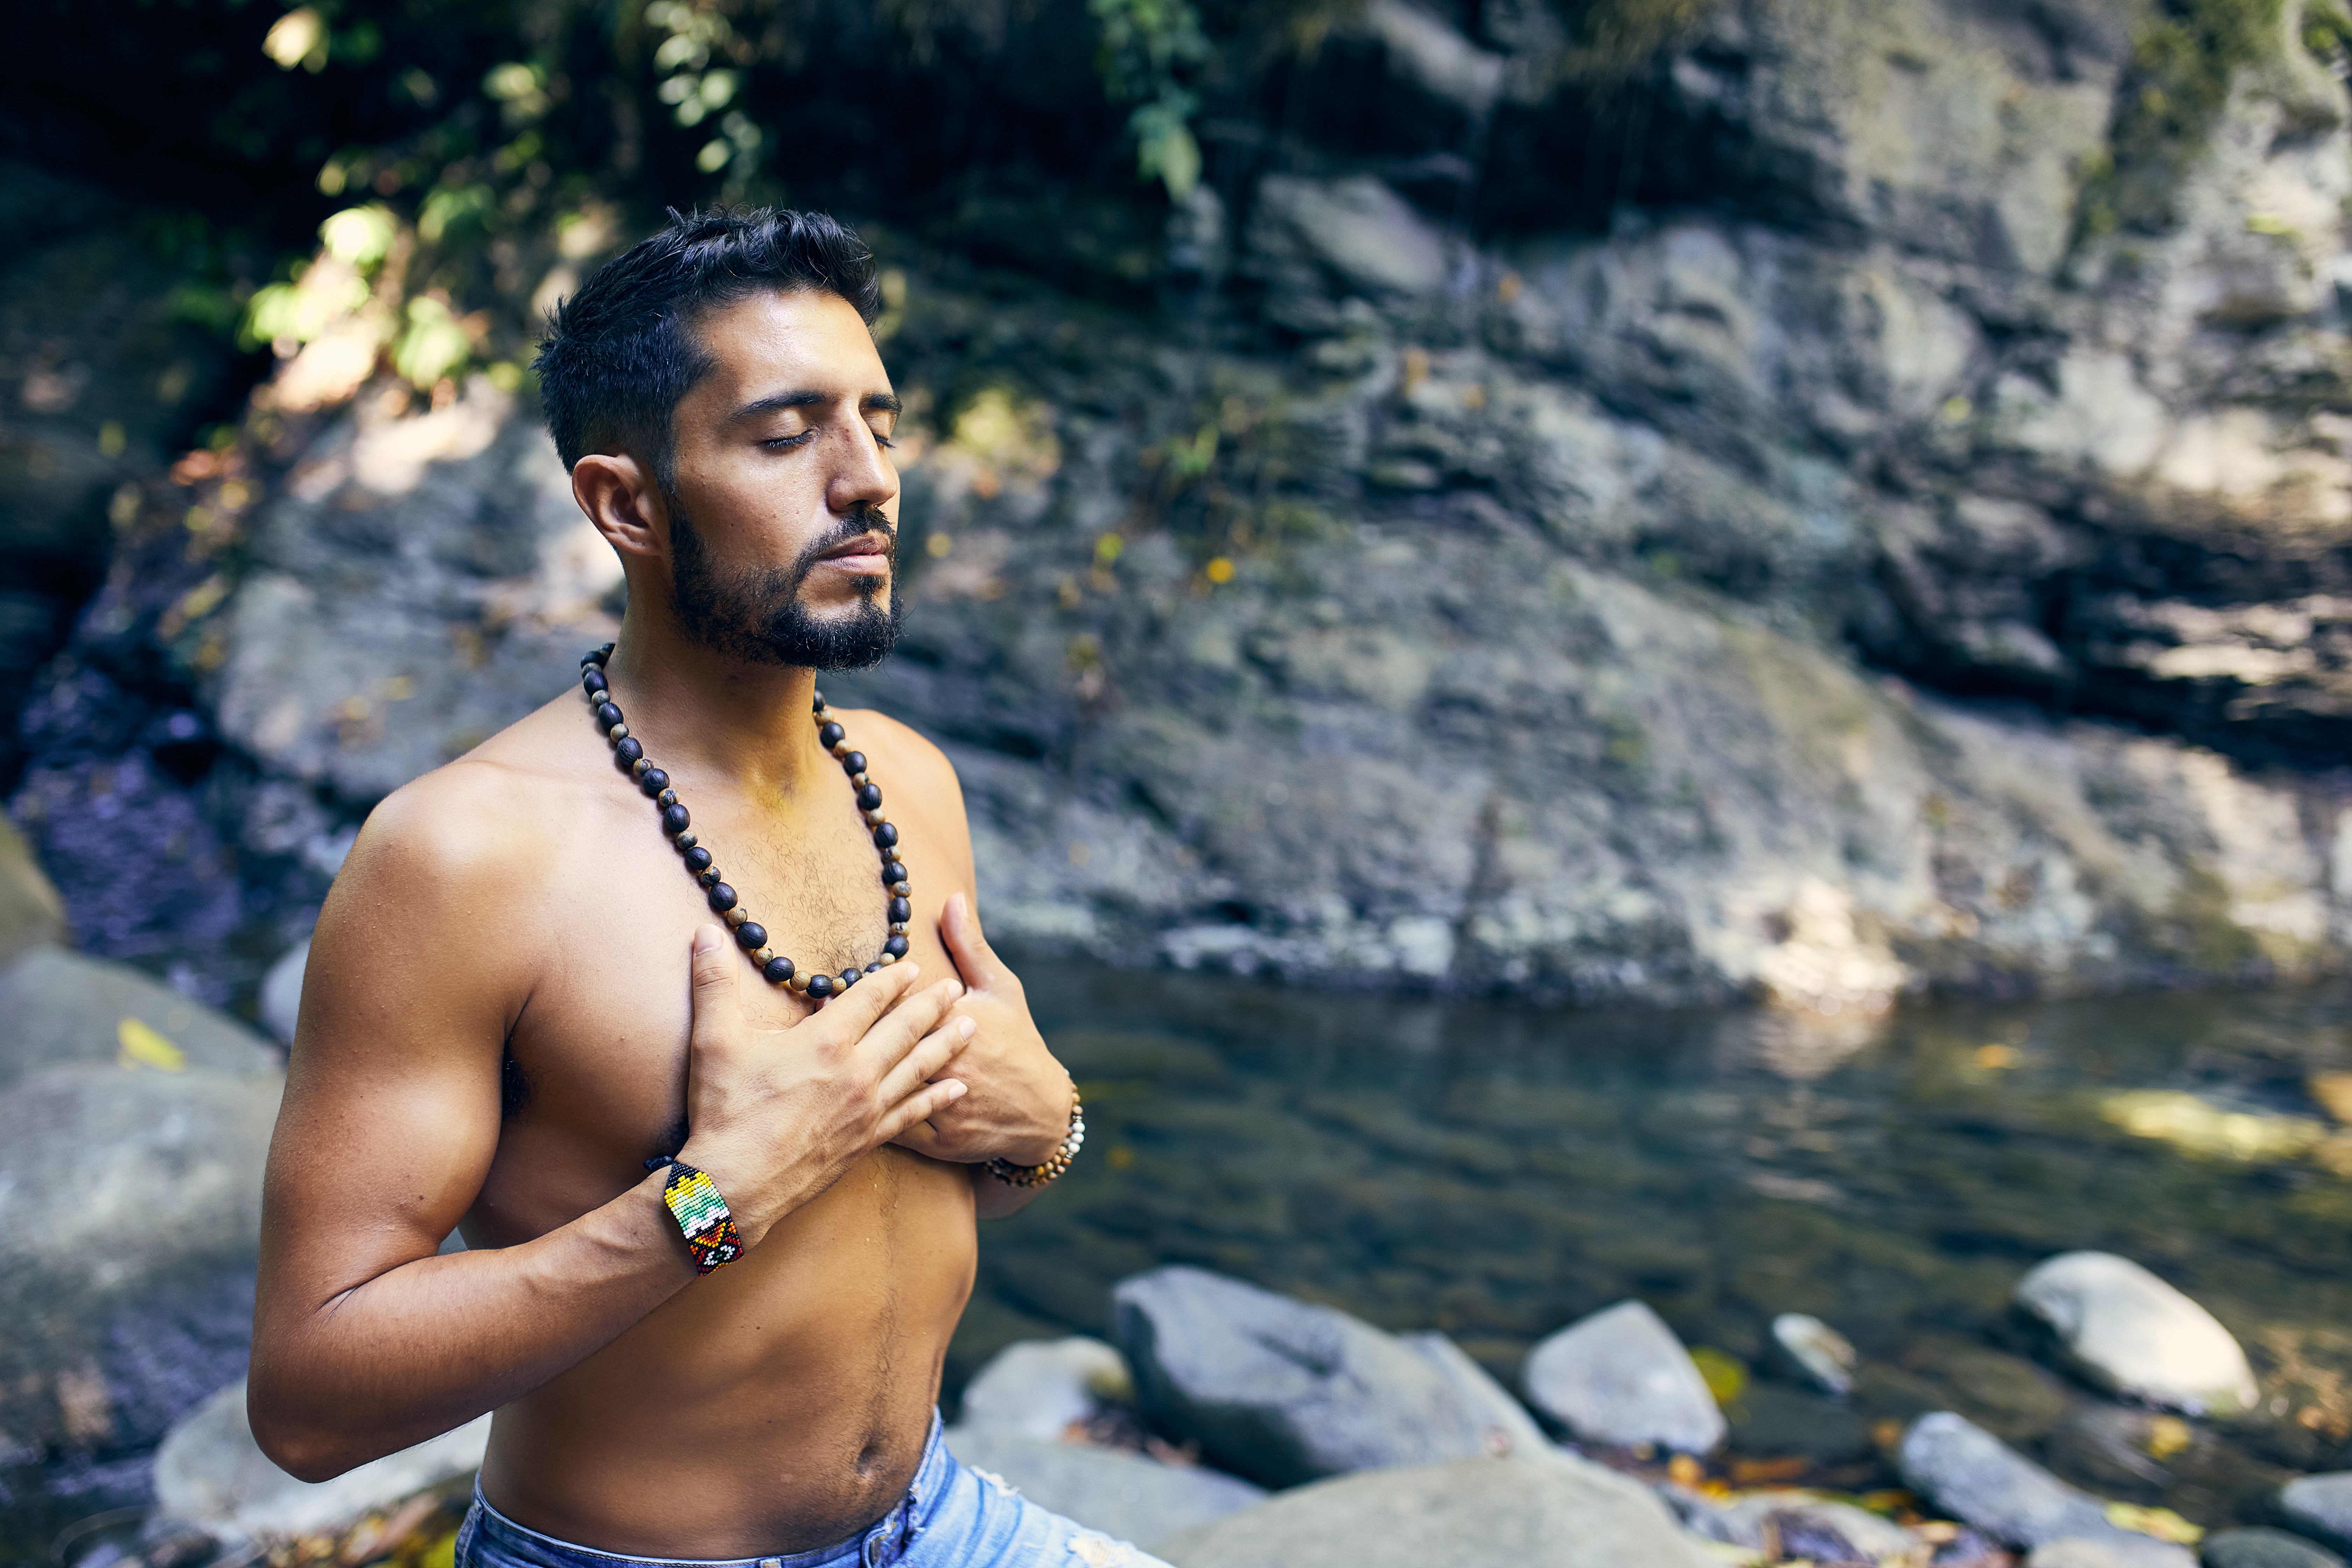 A man embraces his 4th chakra energy center